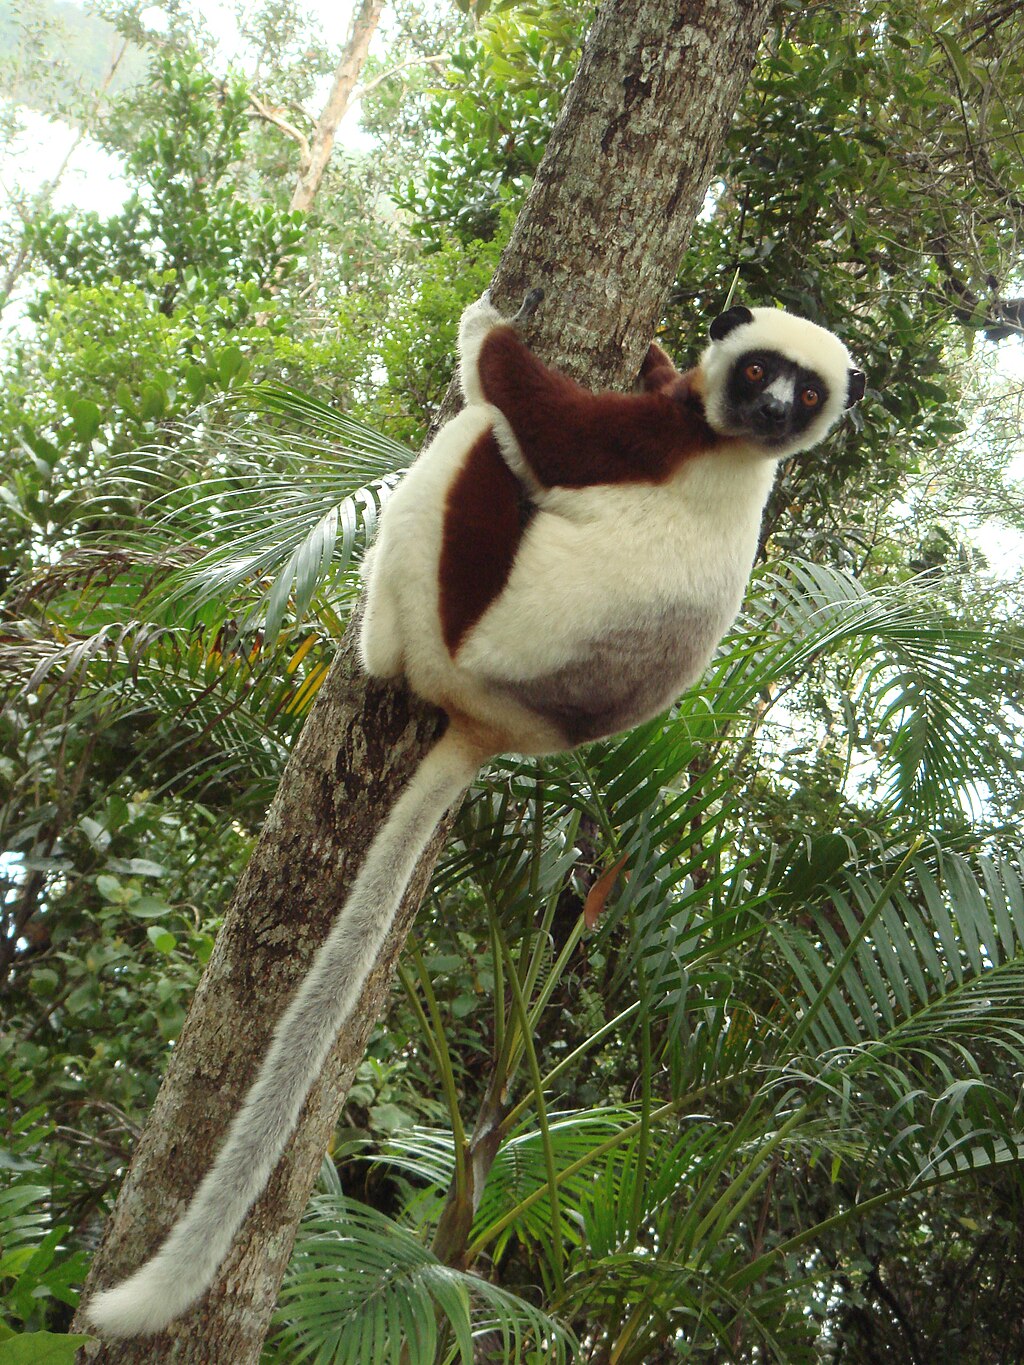 sifaka picture from wikipedia